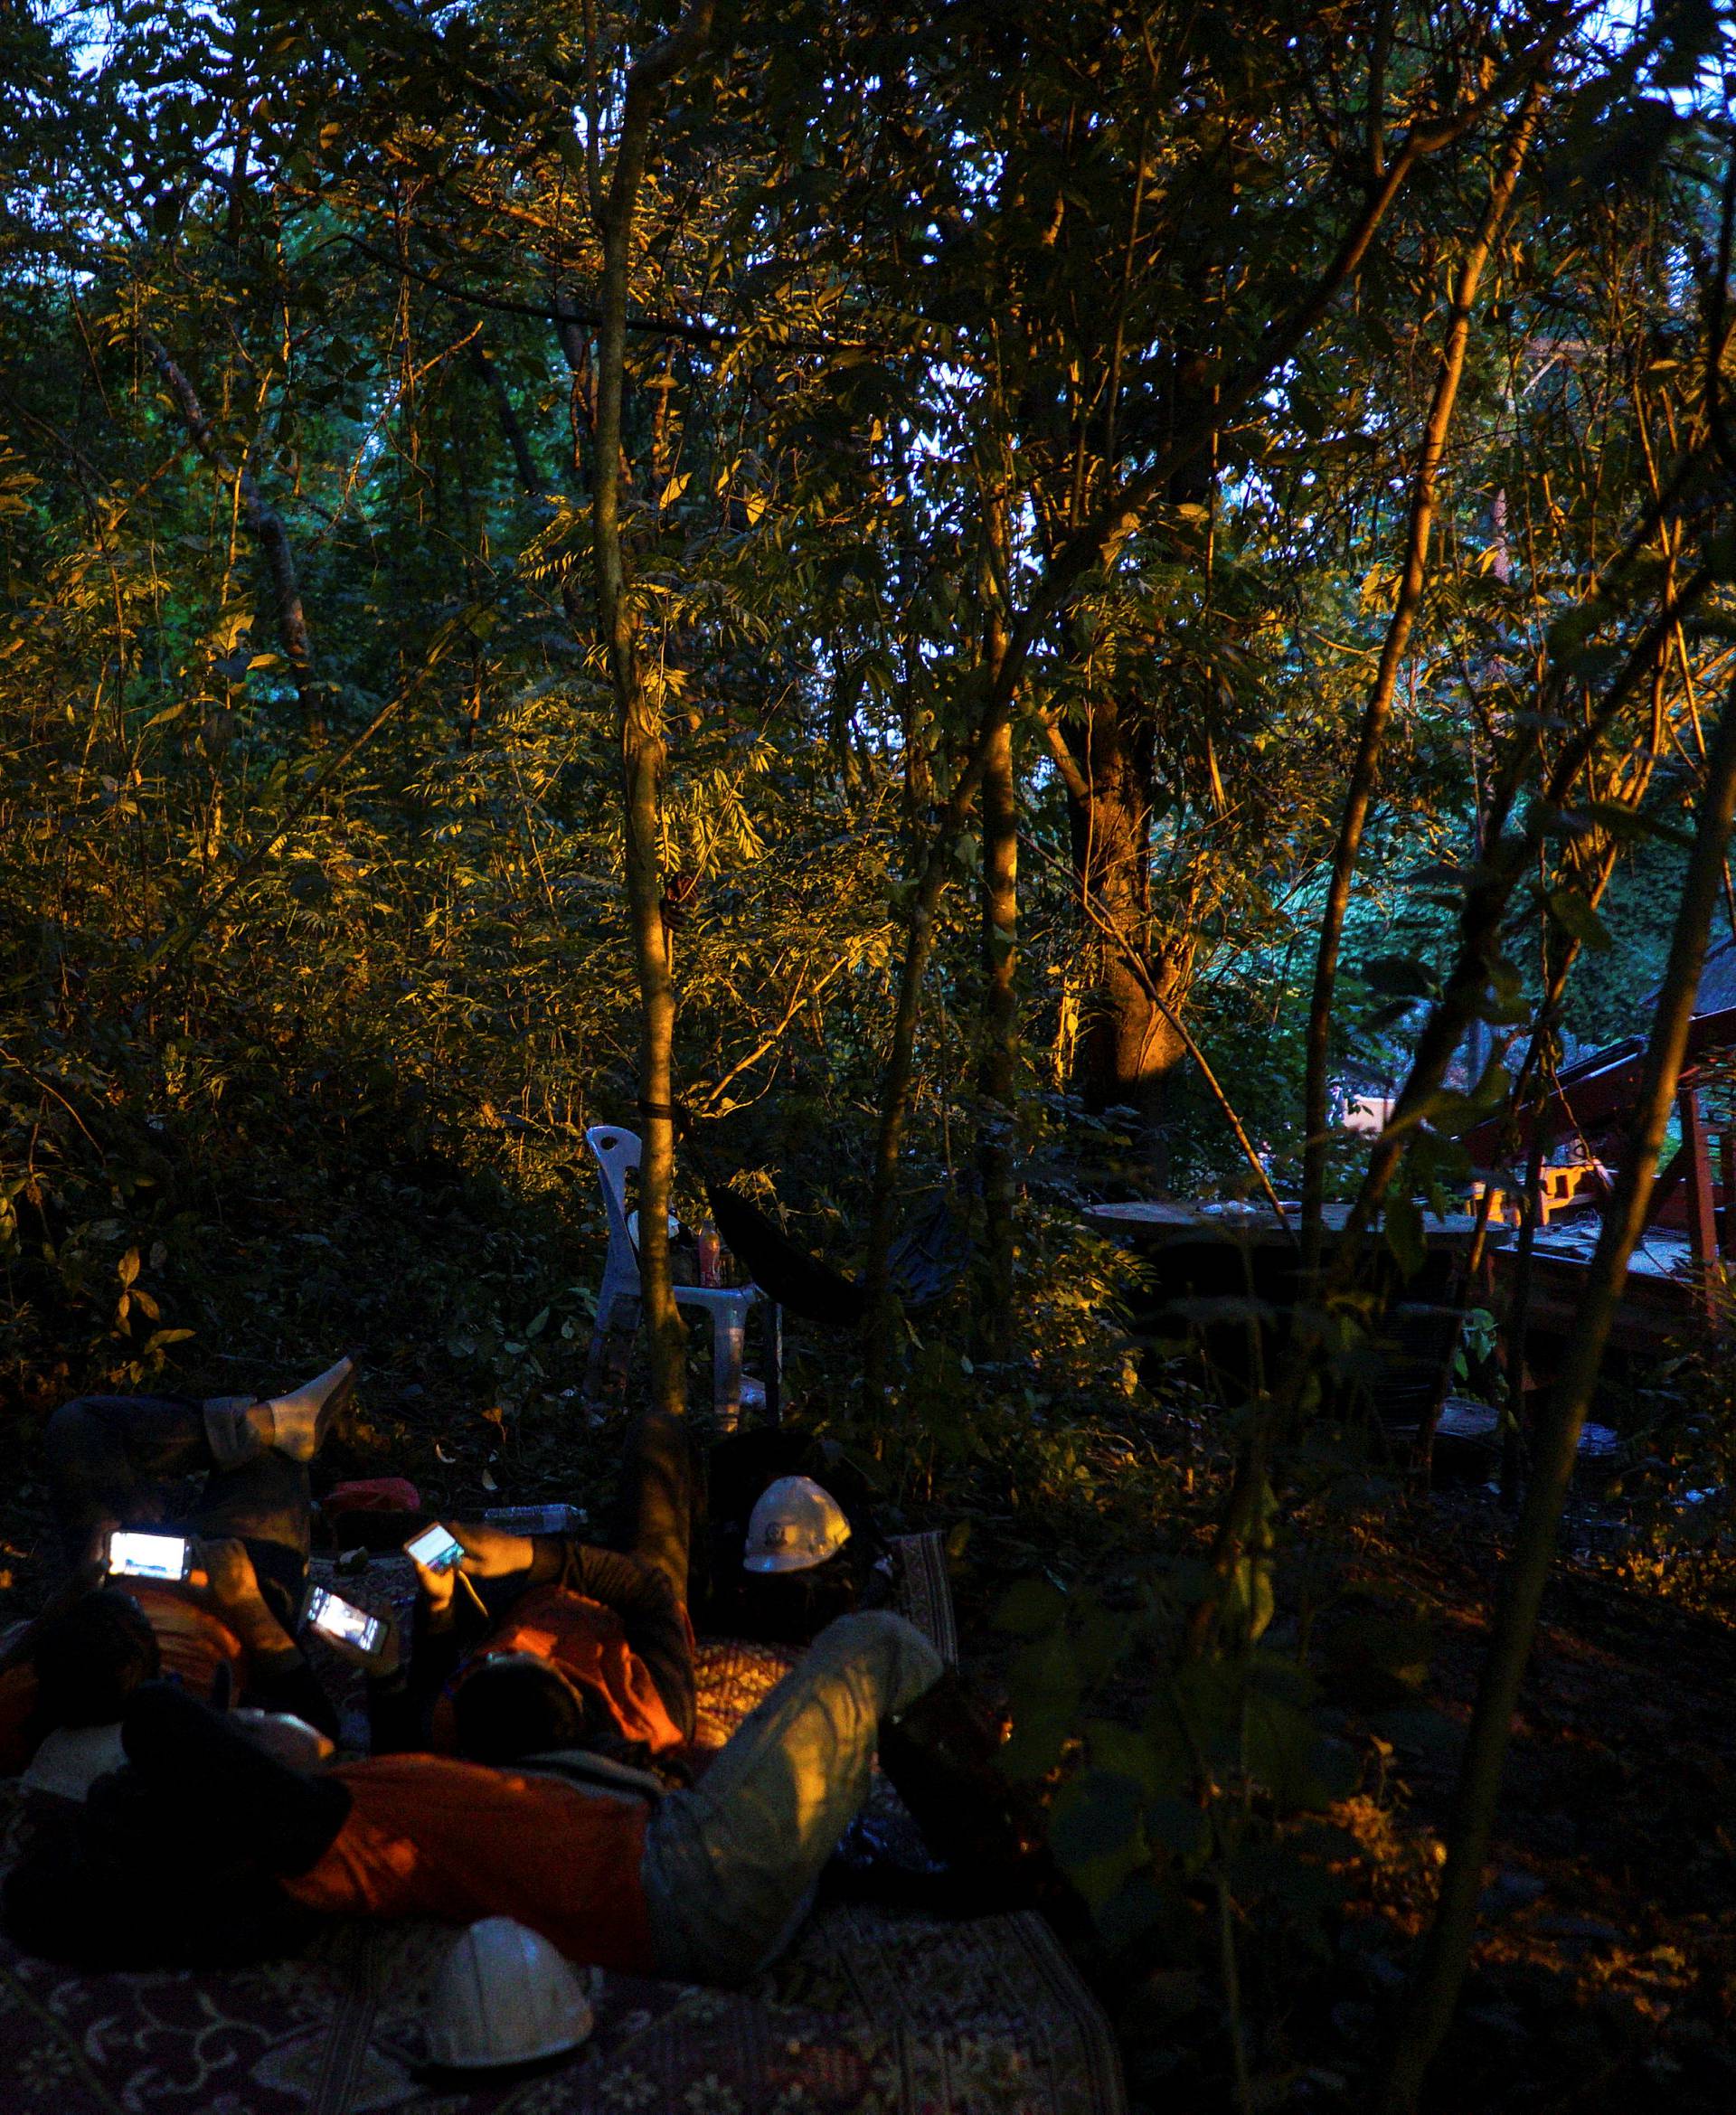 Rescue workers use mobile phones as they take a short break near the Tham Luang cave in the northern province of Chiang Rai